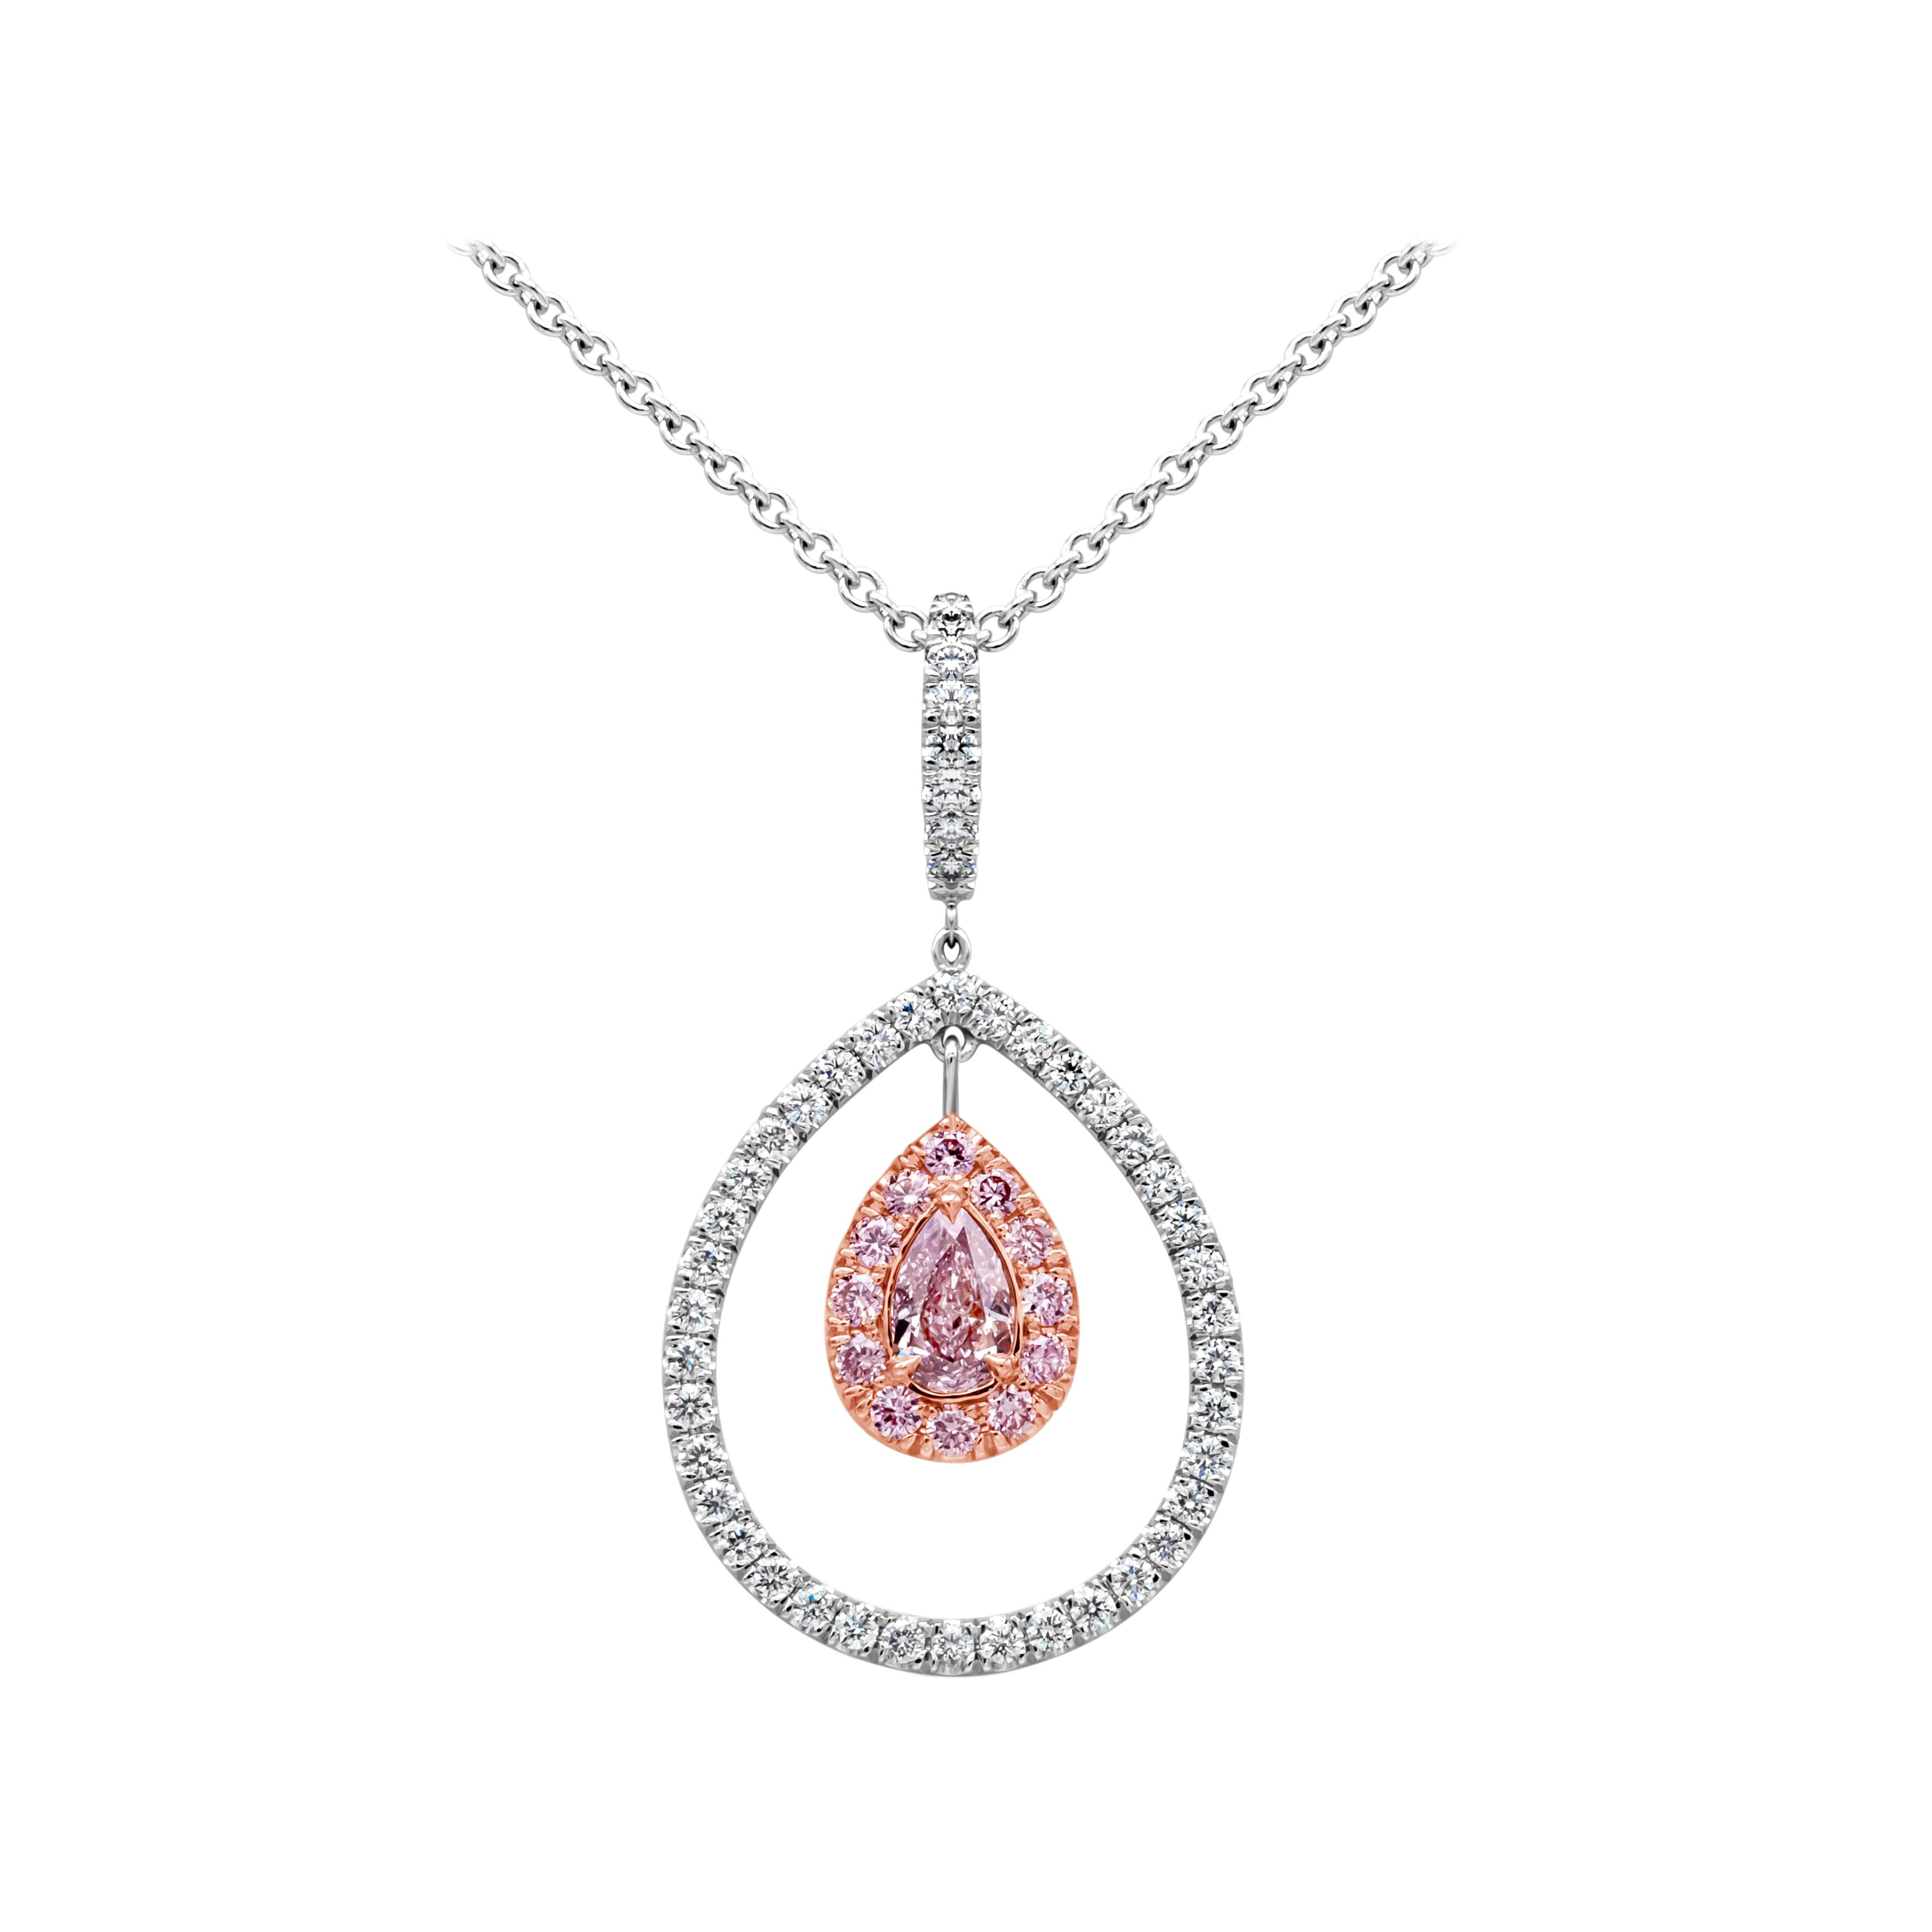 A beautiful pendant necklace showcasing a 0.30 carats pear shape fancy purple pink diamond certified by GIA as fancy purple pink color and VS2 in clarity. Center diamond is surrounded by two rows of matching pink diamonds weighing 0.17 carats total